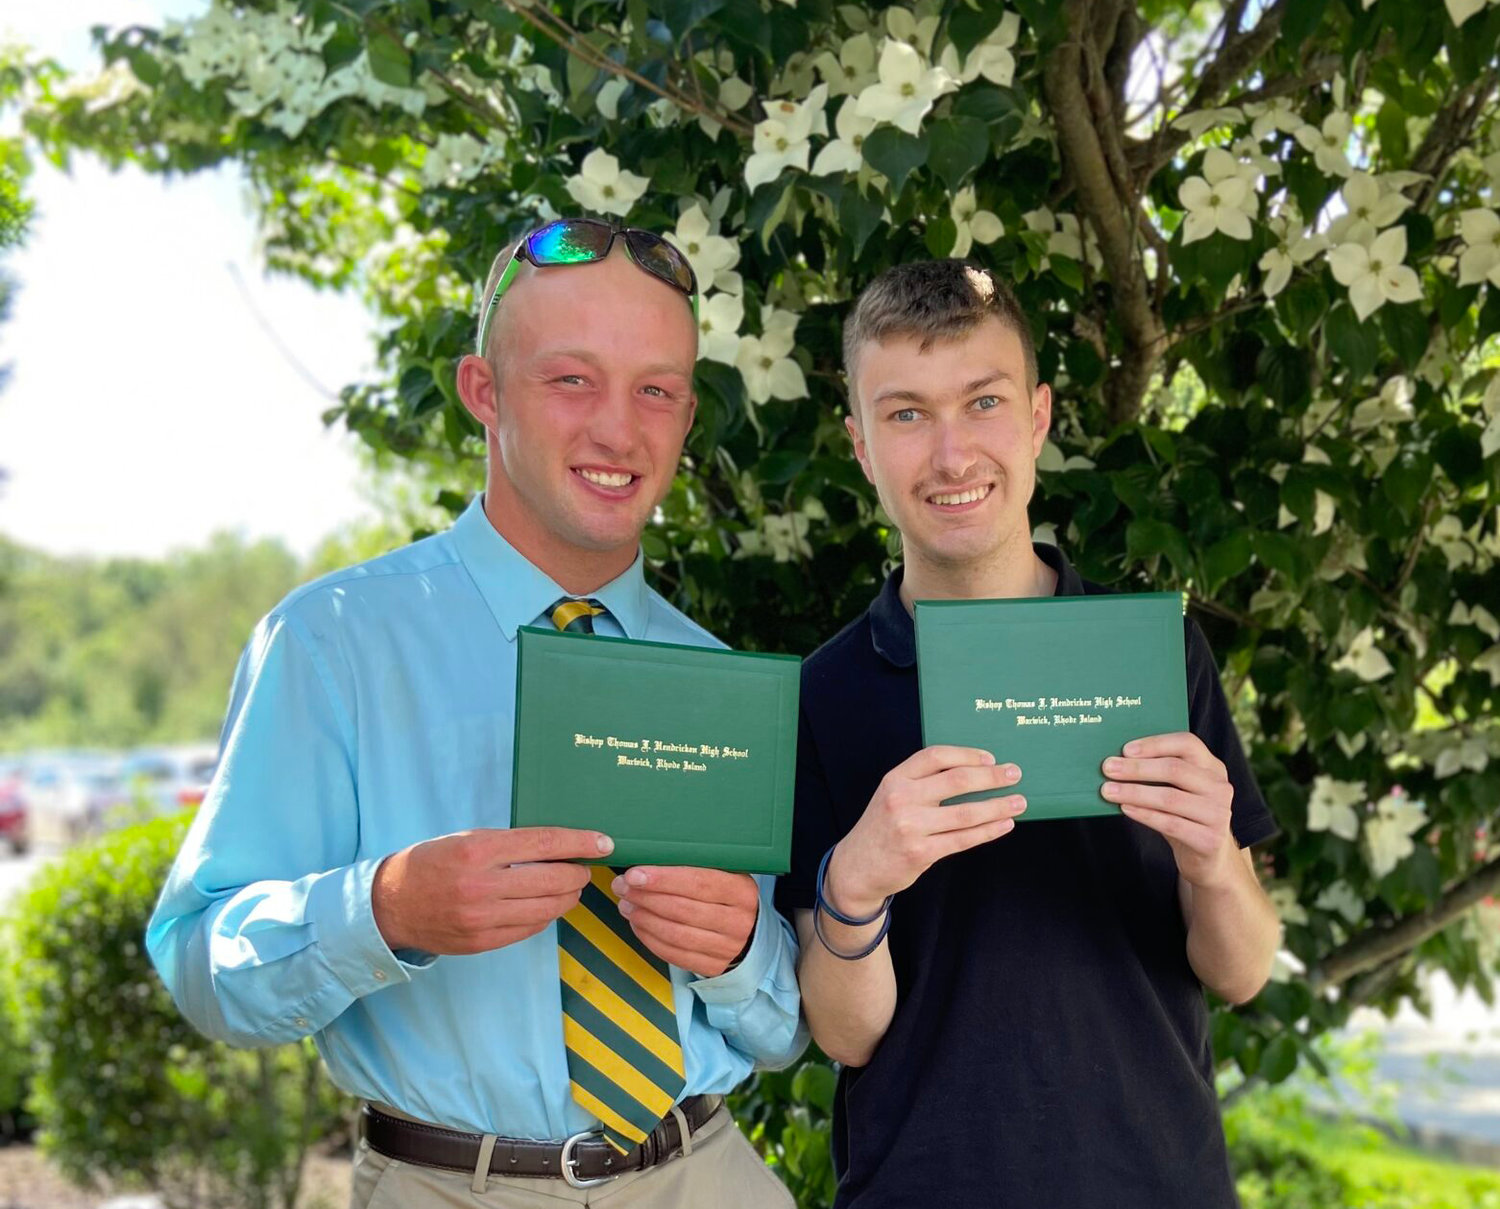 From left, Stephen Baker and Mike Castelli smile as they hold their diplomas from Bishop Hendricken High School